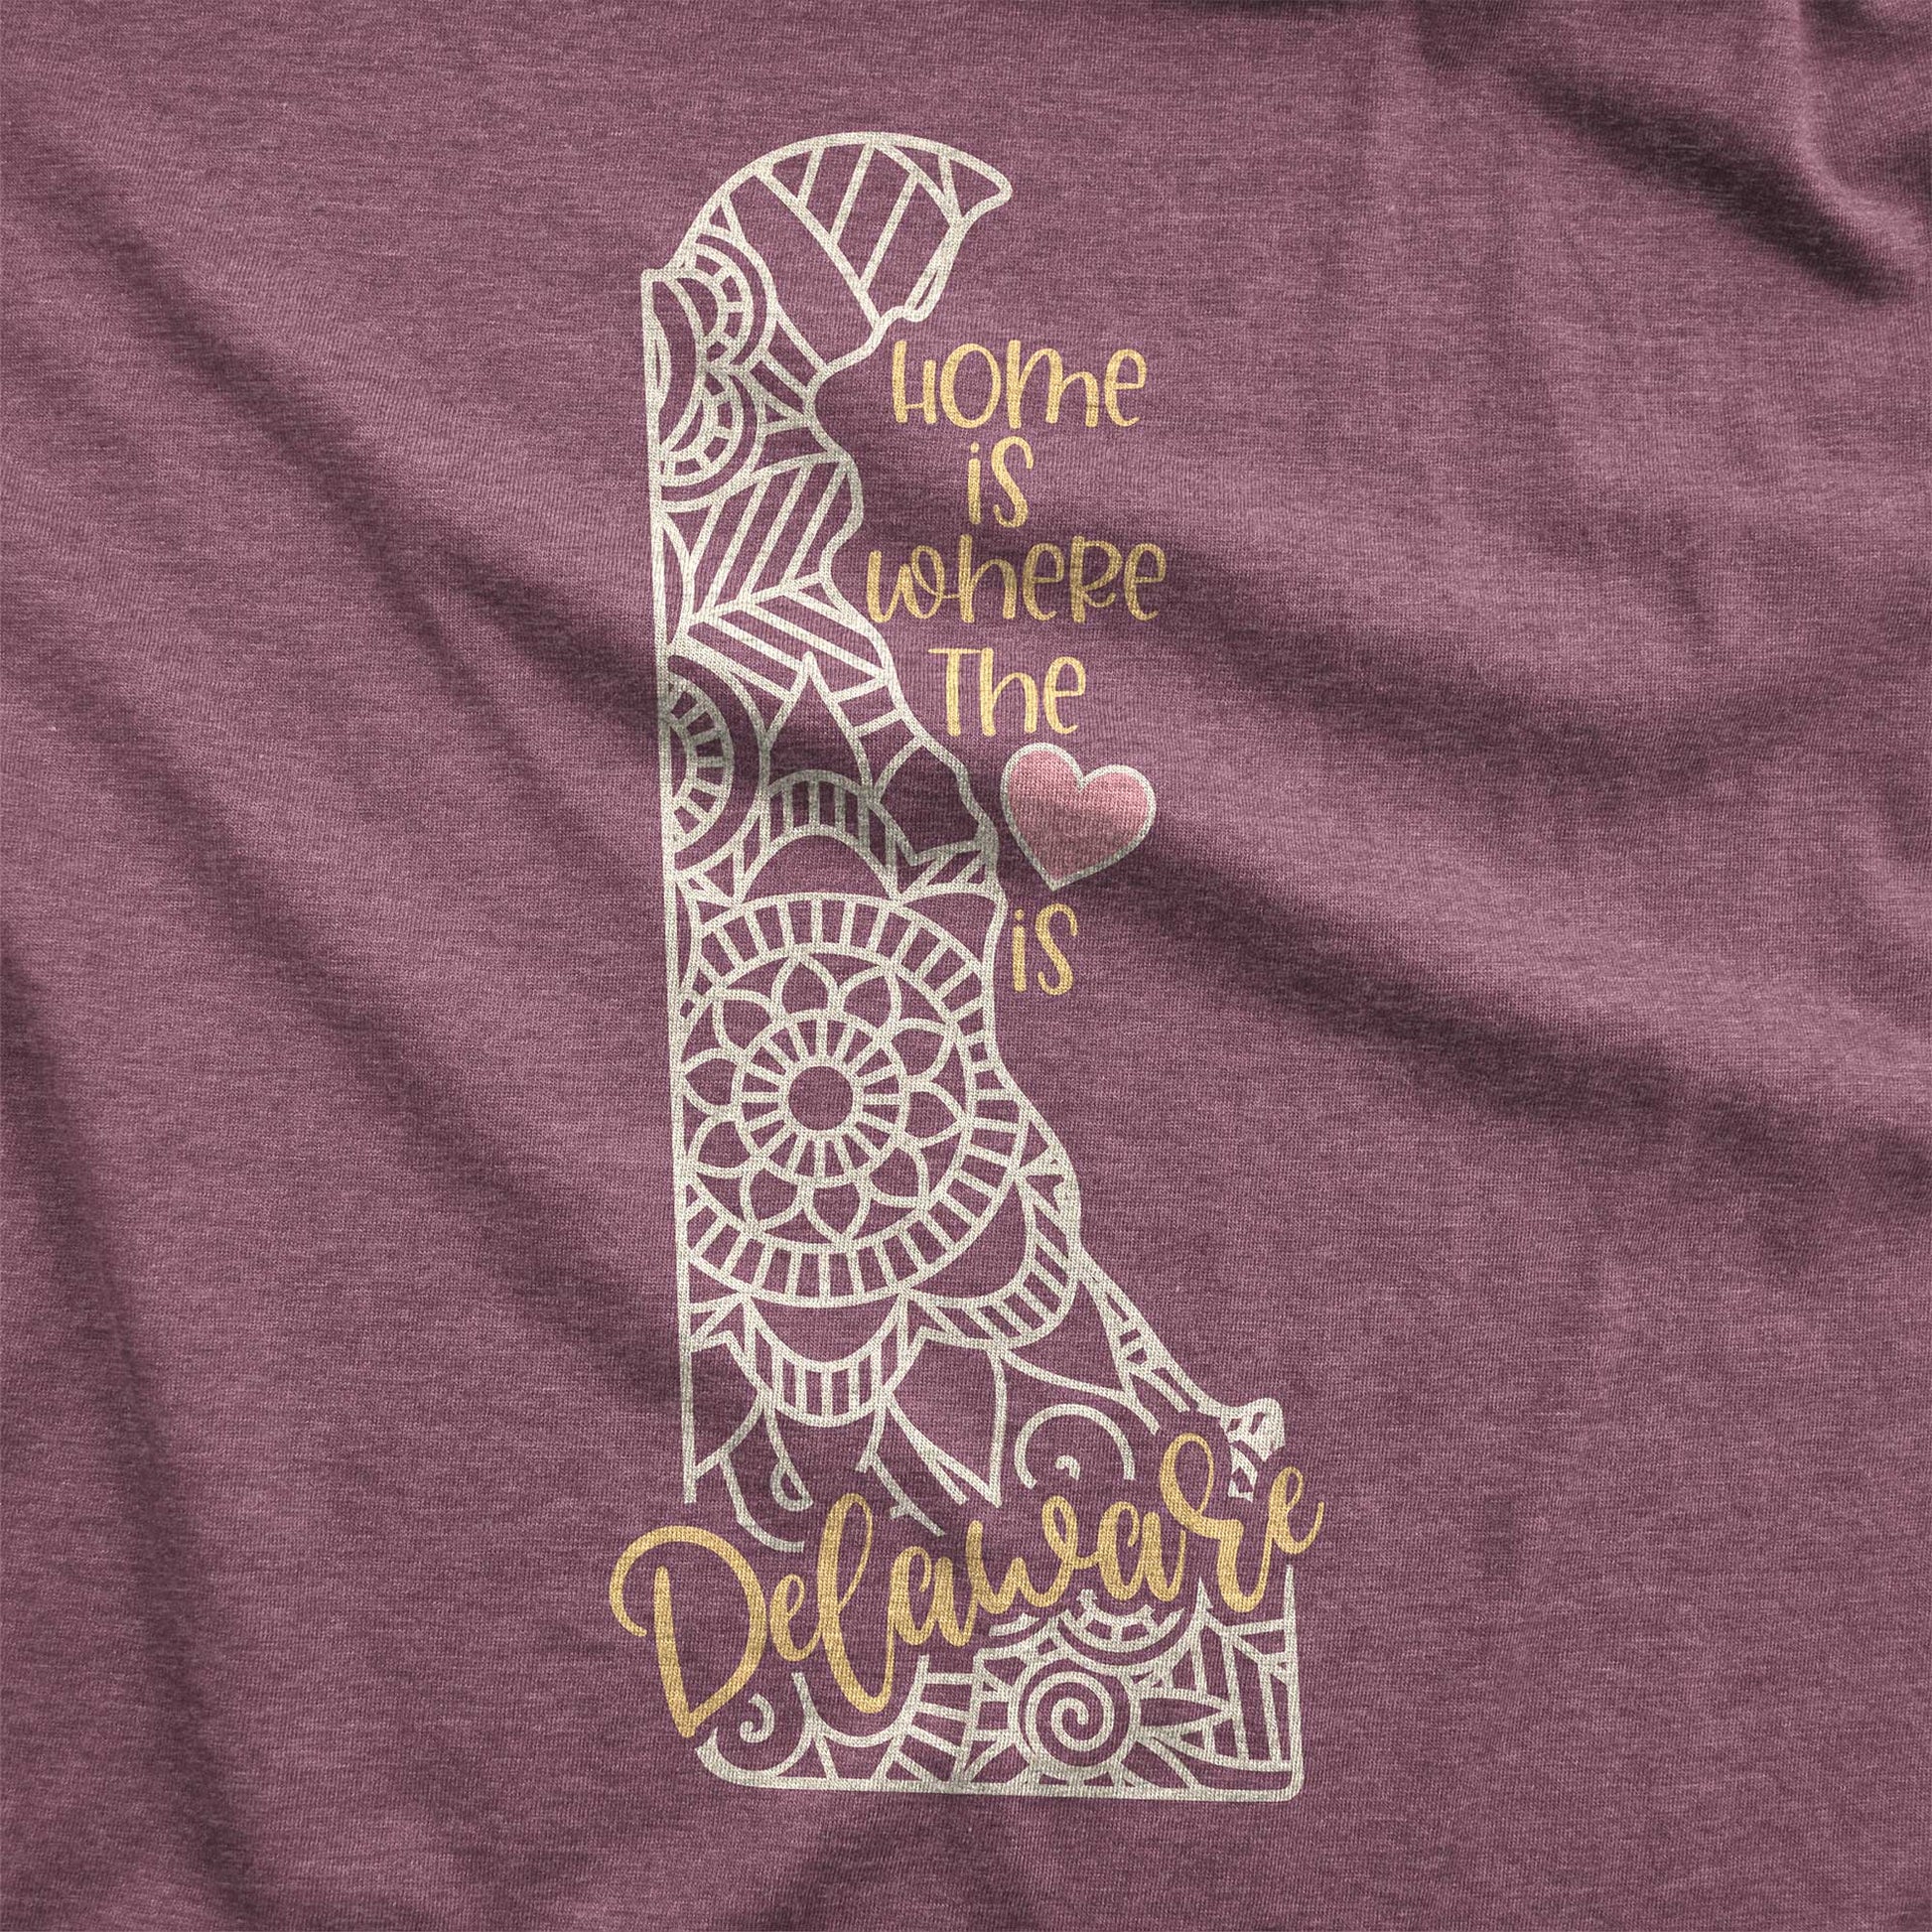 A heather maroon Bella Canvas swatch featuring a mandala in the shape of Delaware with the words home is where the heart is.